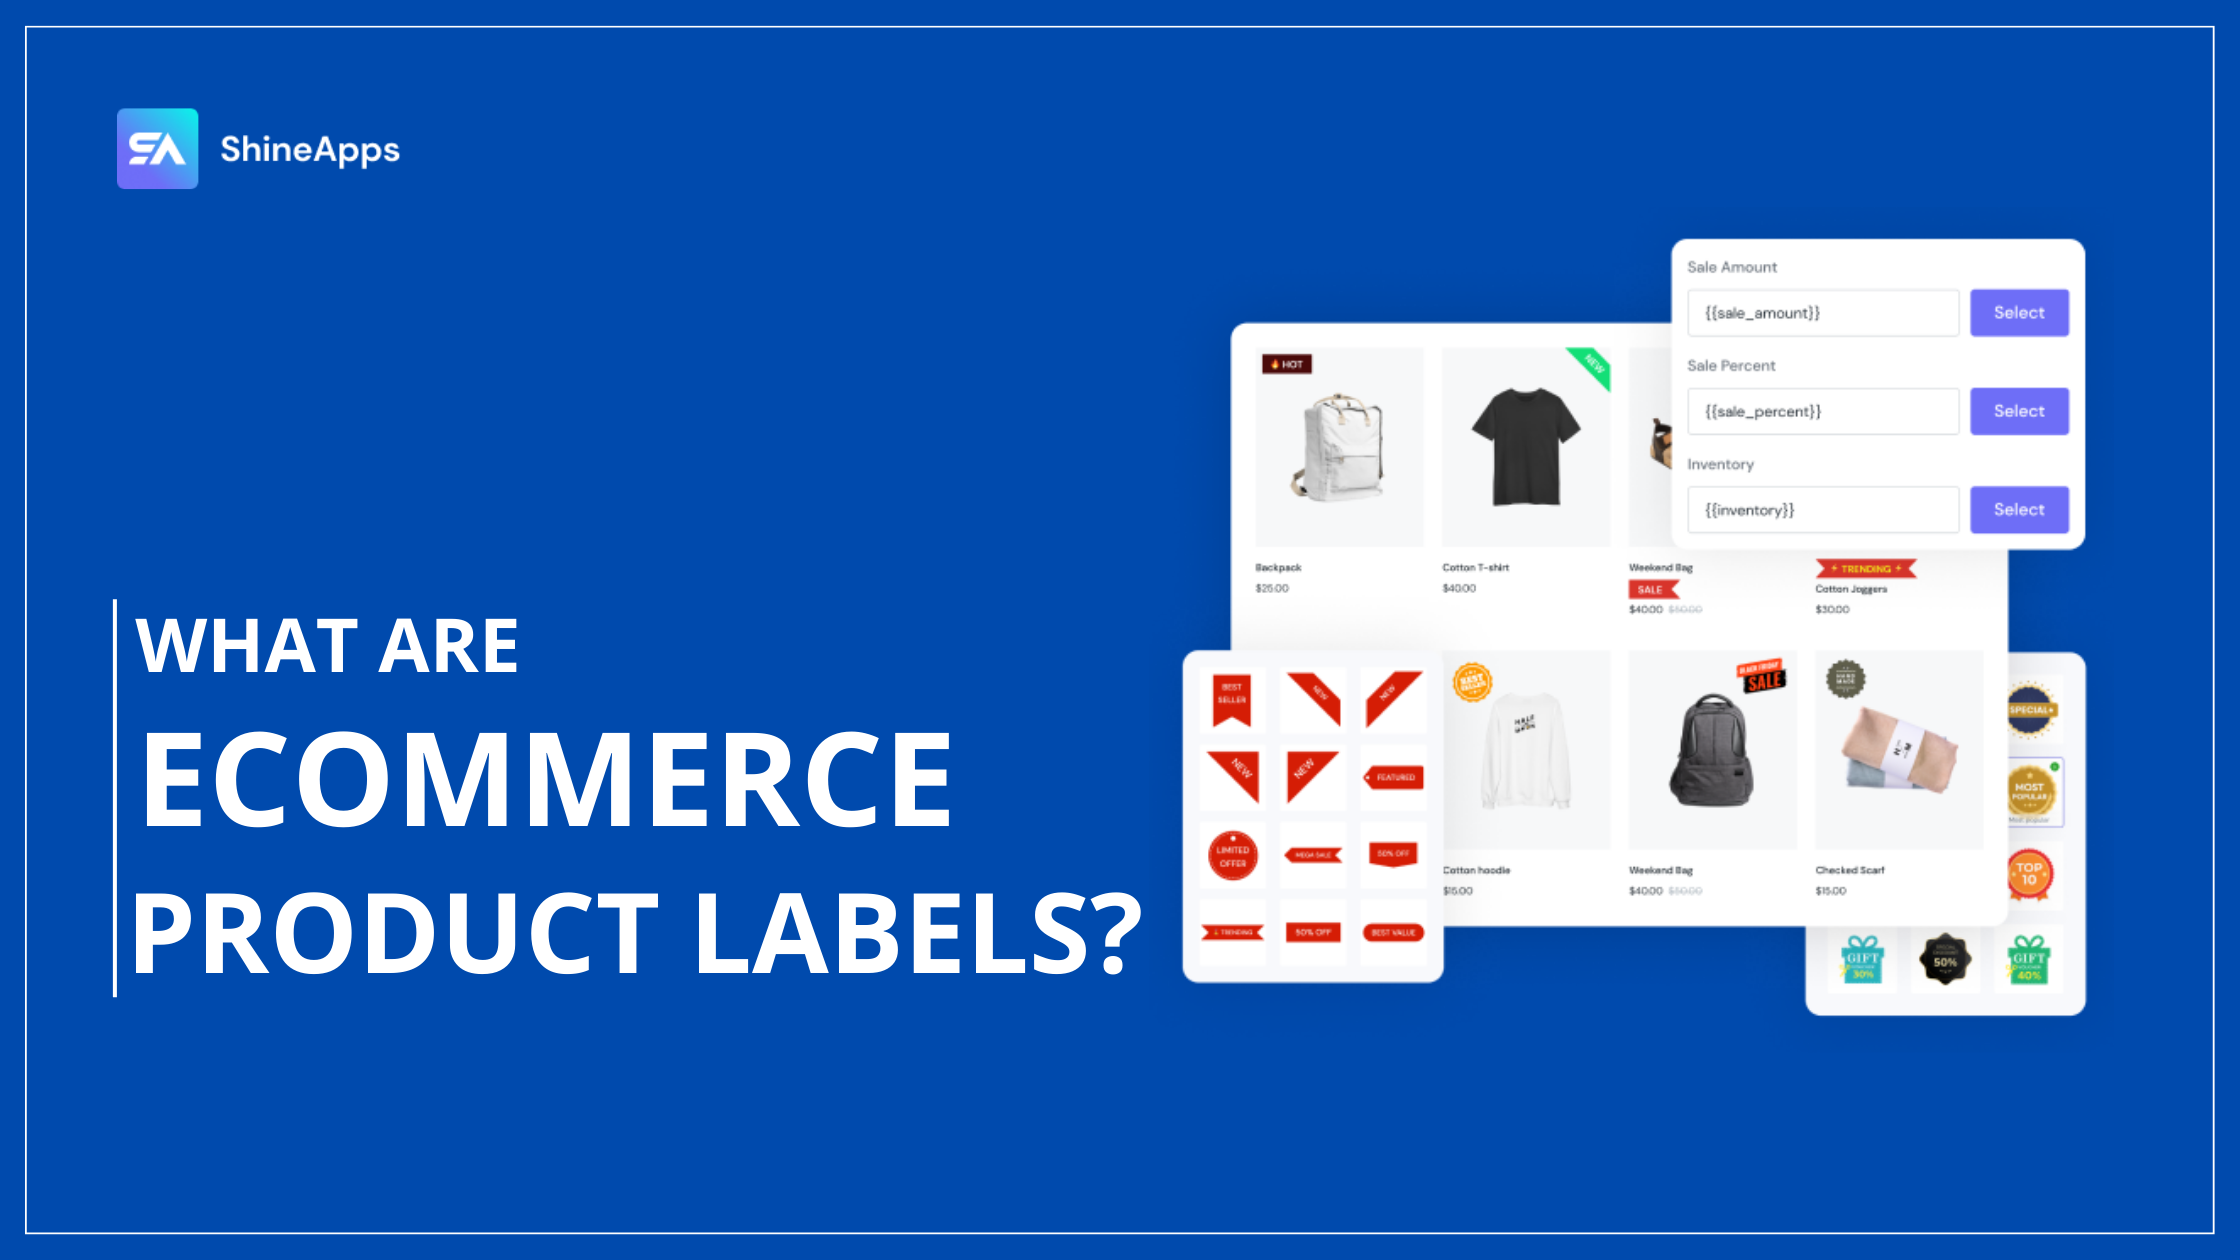 What are eCommerce product labels?